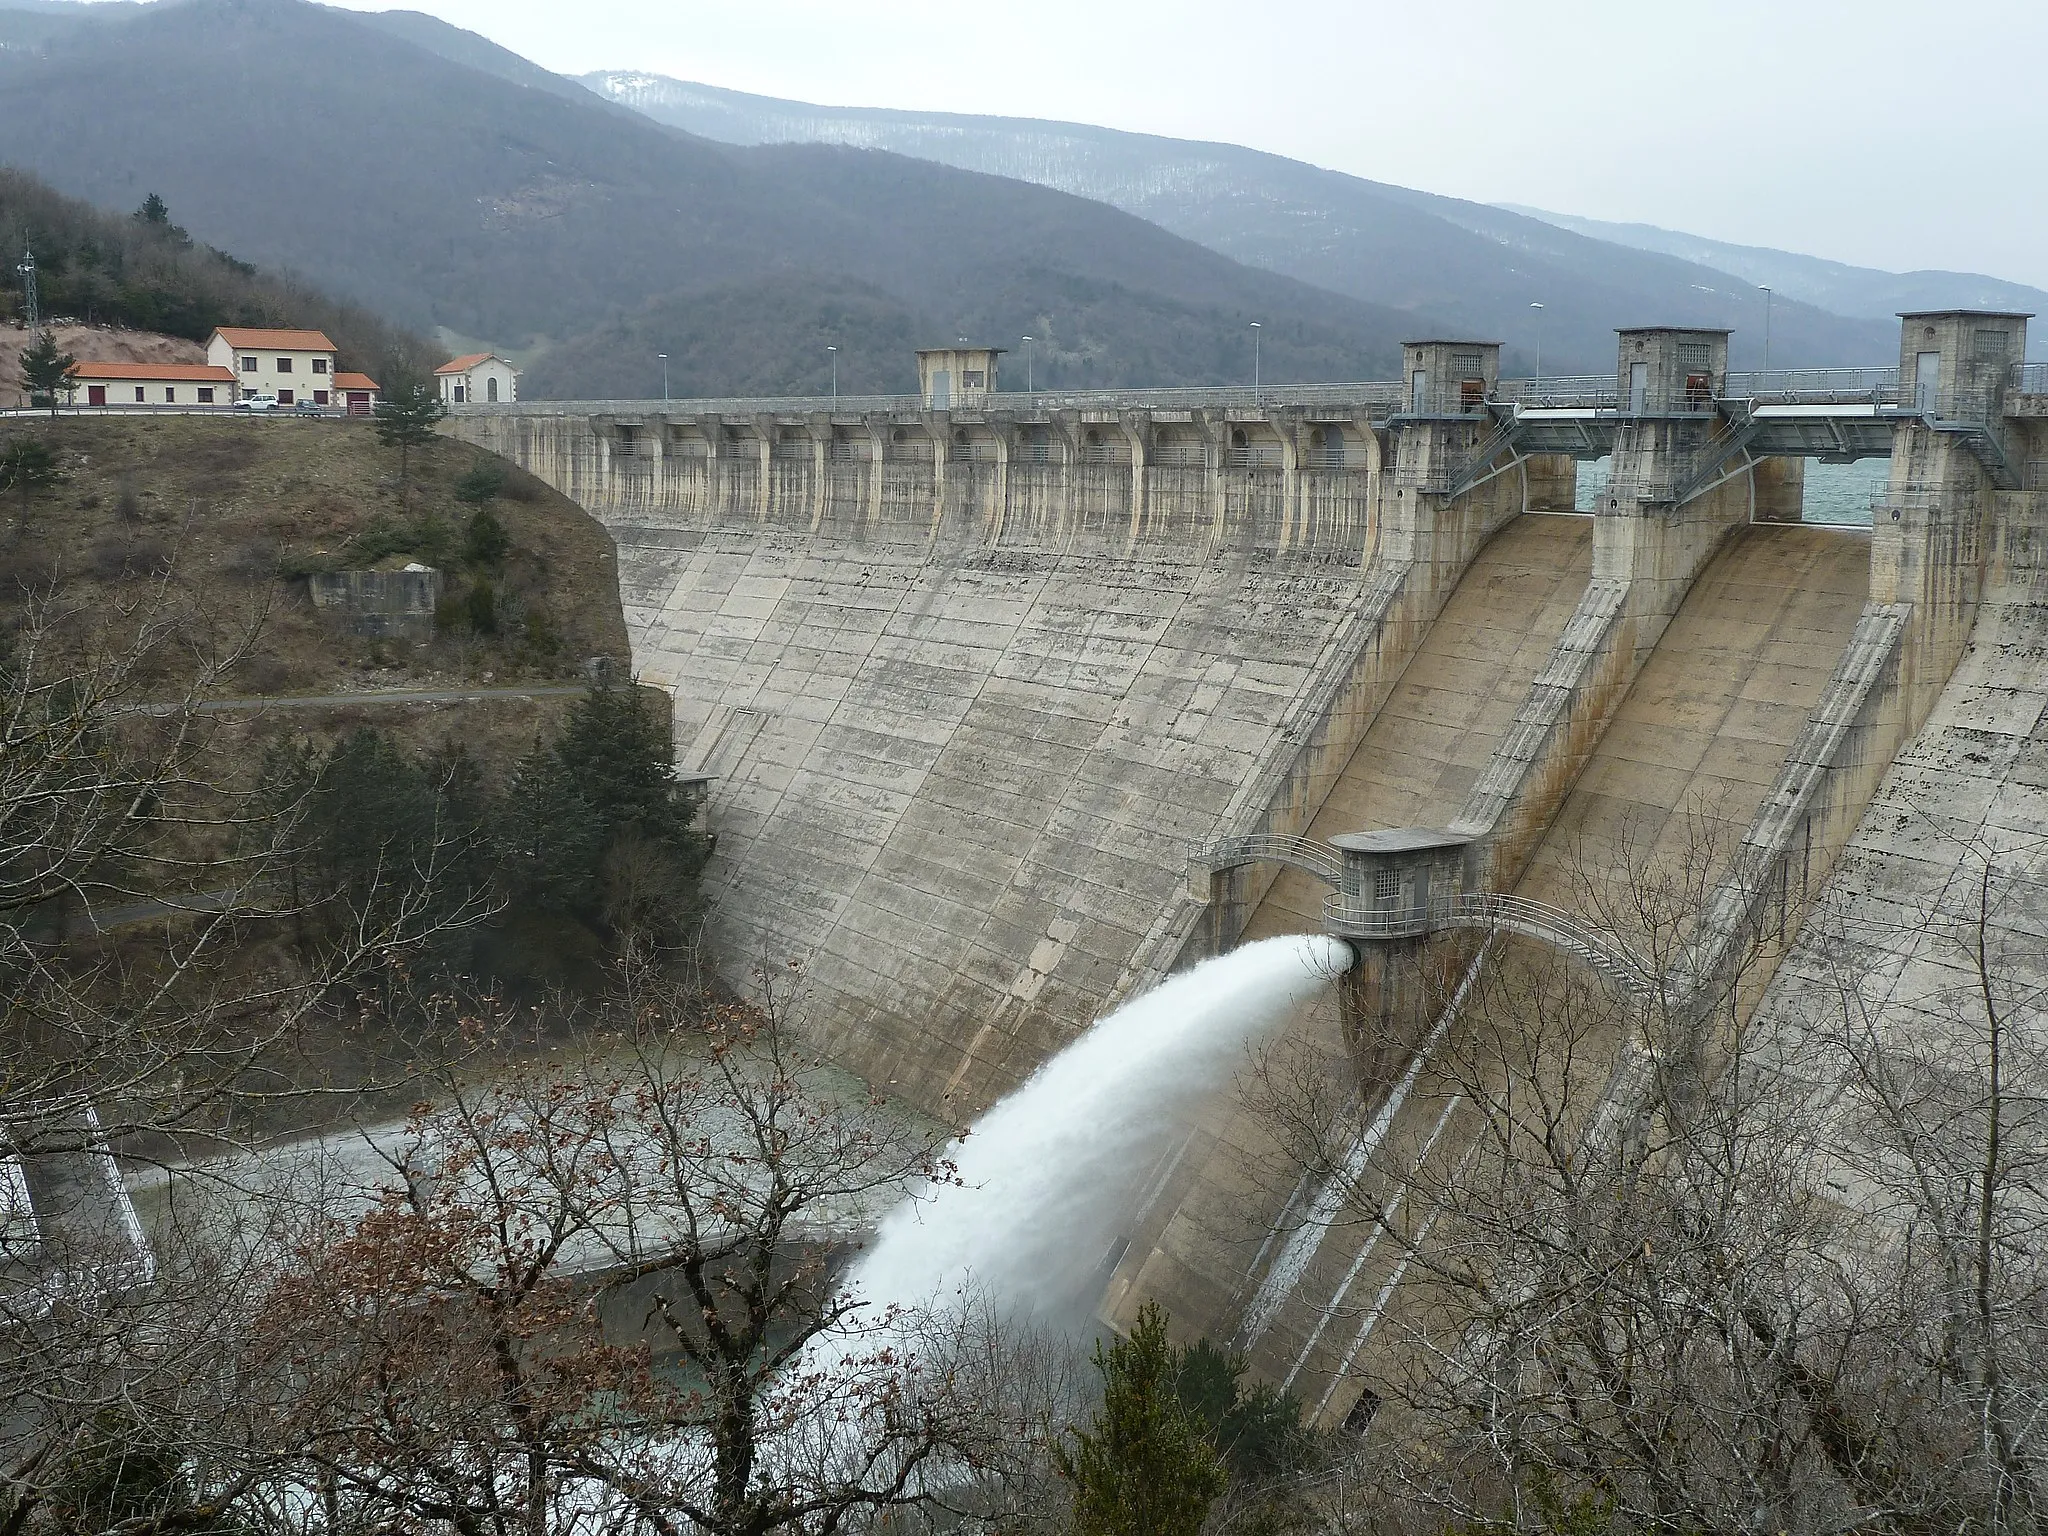 Photo showing: The dam of Eugi, in operation since 1973, is located in the valley of Esteribar (26 kilometers from Pamplona). Its construction began in 1966 to ensure supply to the growing population and industry of Pamplona and its area, which previously was supplied by the spring of Arteta, in use since 1886, because this spring was no longer able to meet the demand for water, especially in times of drought. It is a gravity dam ground curve and its height above the level of the river is 44.3 m.